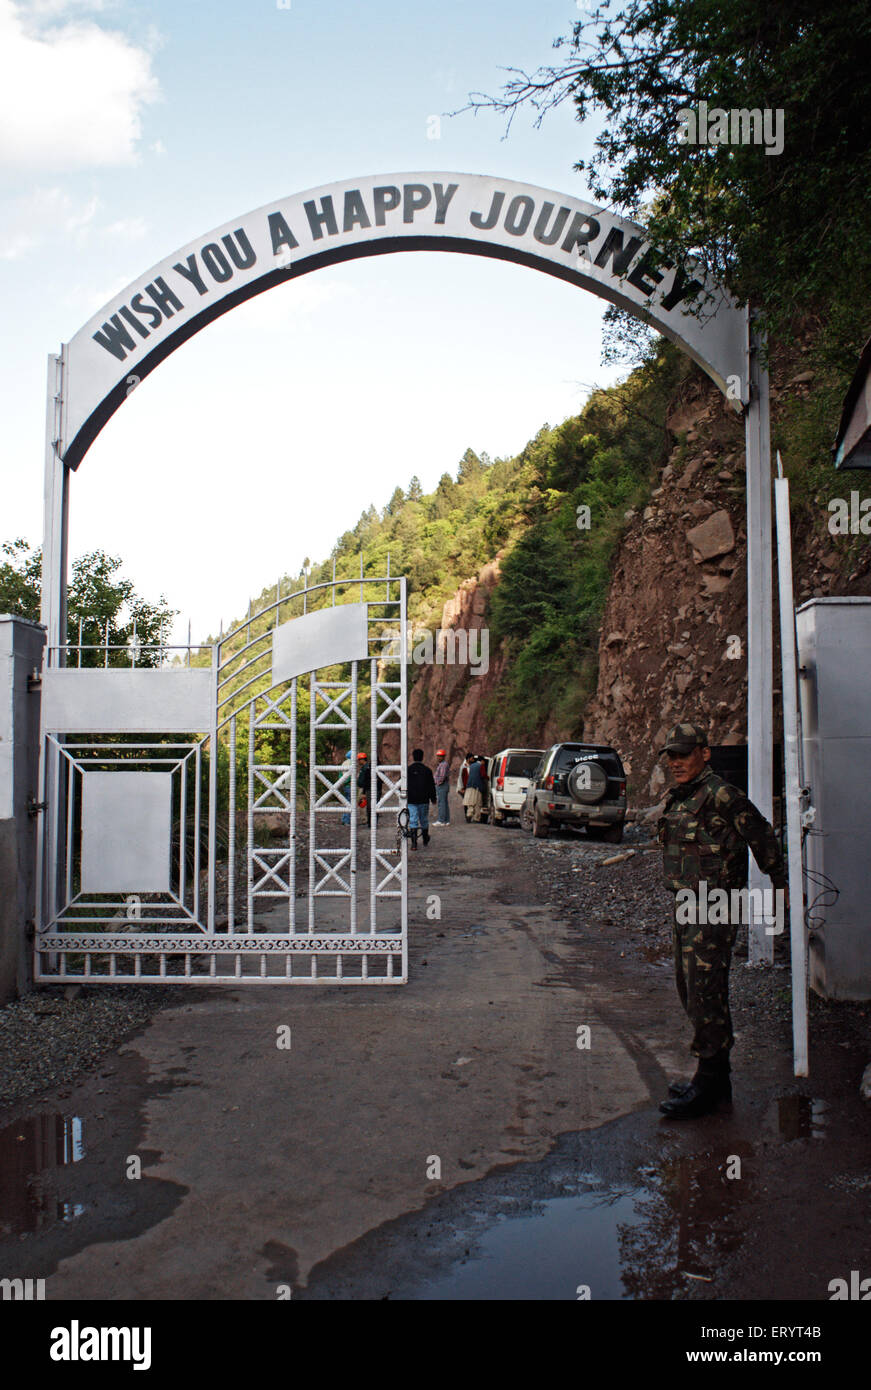 Happy journey on entry gate guarded by bsf soldier at Kamanpost ; Uri ; Jammu and Kashmir ; India 6 April 2008 Stock Photo